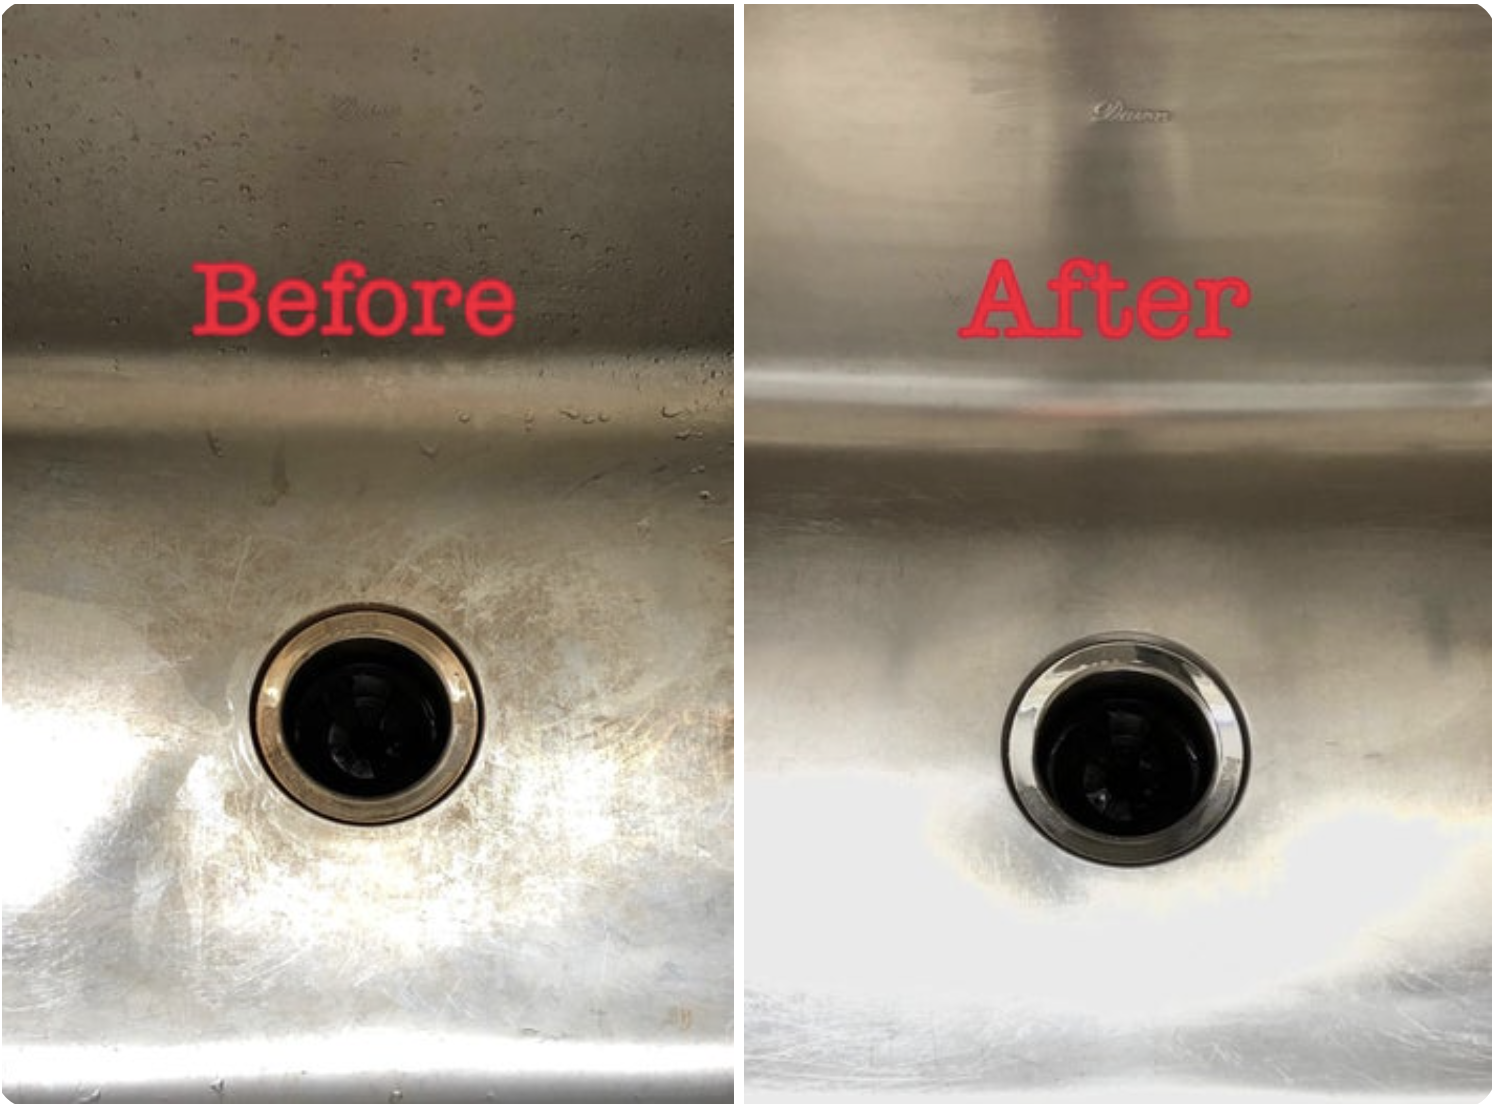 A reviewer&#x27;s stainless steel sink with staining and the word &quot;before&quot; and then the same sink after cleaning looking shiny and new